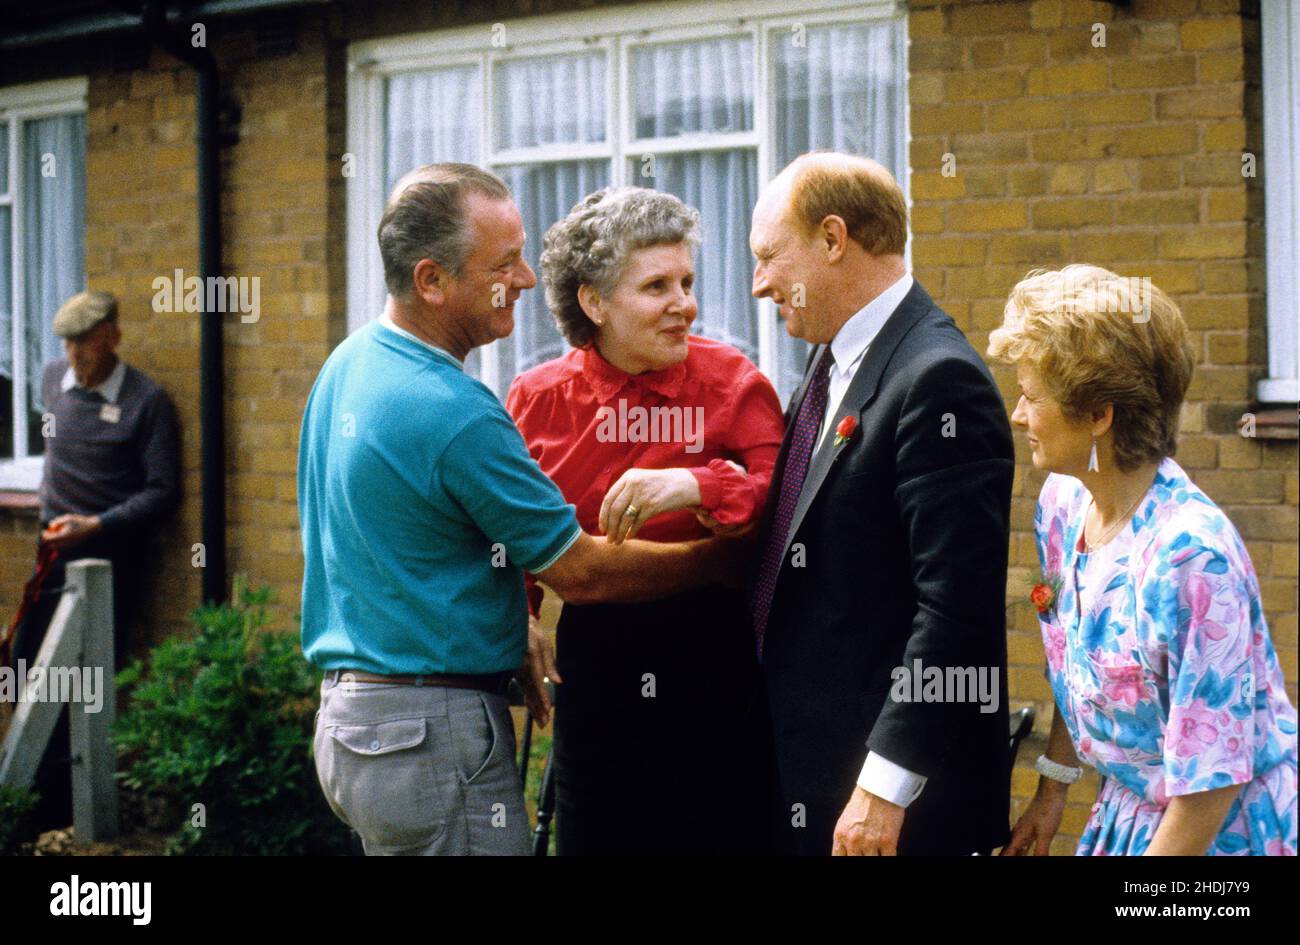 Labour Party leader Neil Kinnock and his wife Glenys campaigning for the 1987 general election in Staffordshire Stock Photo